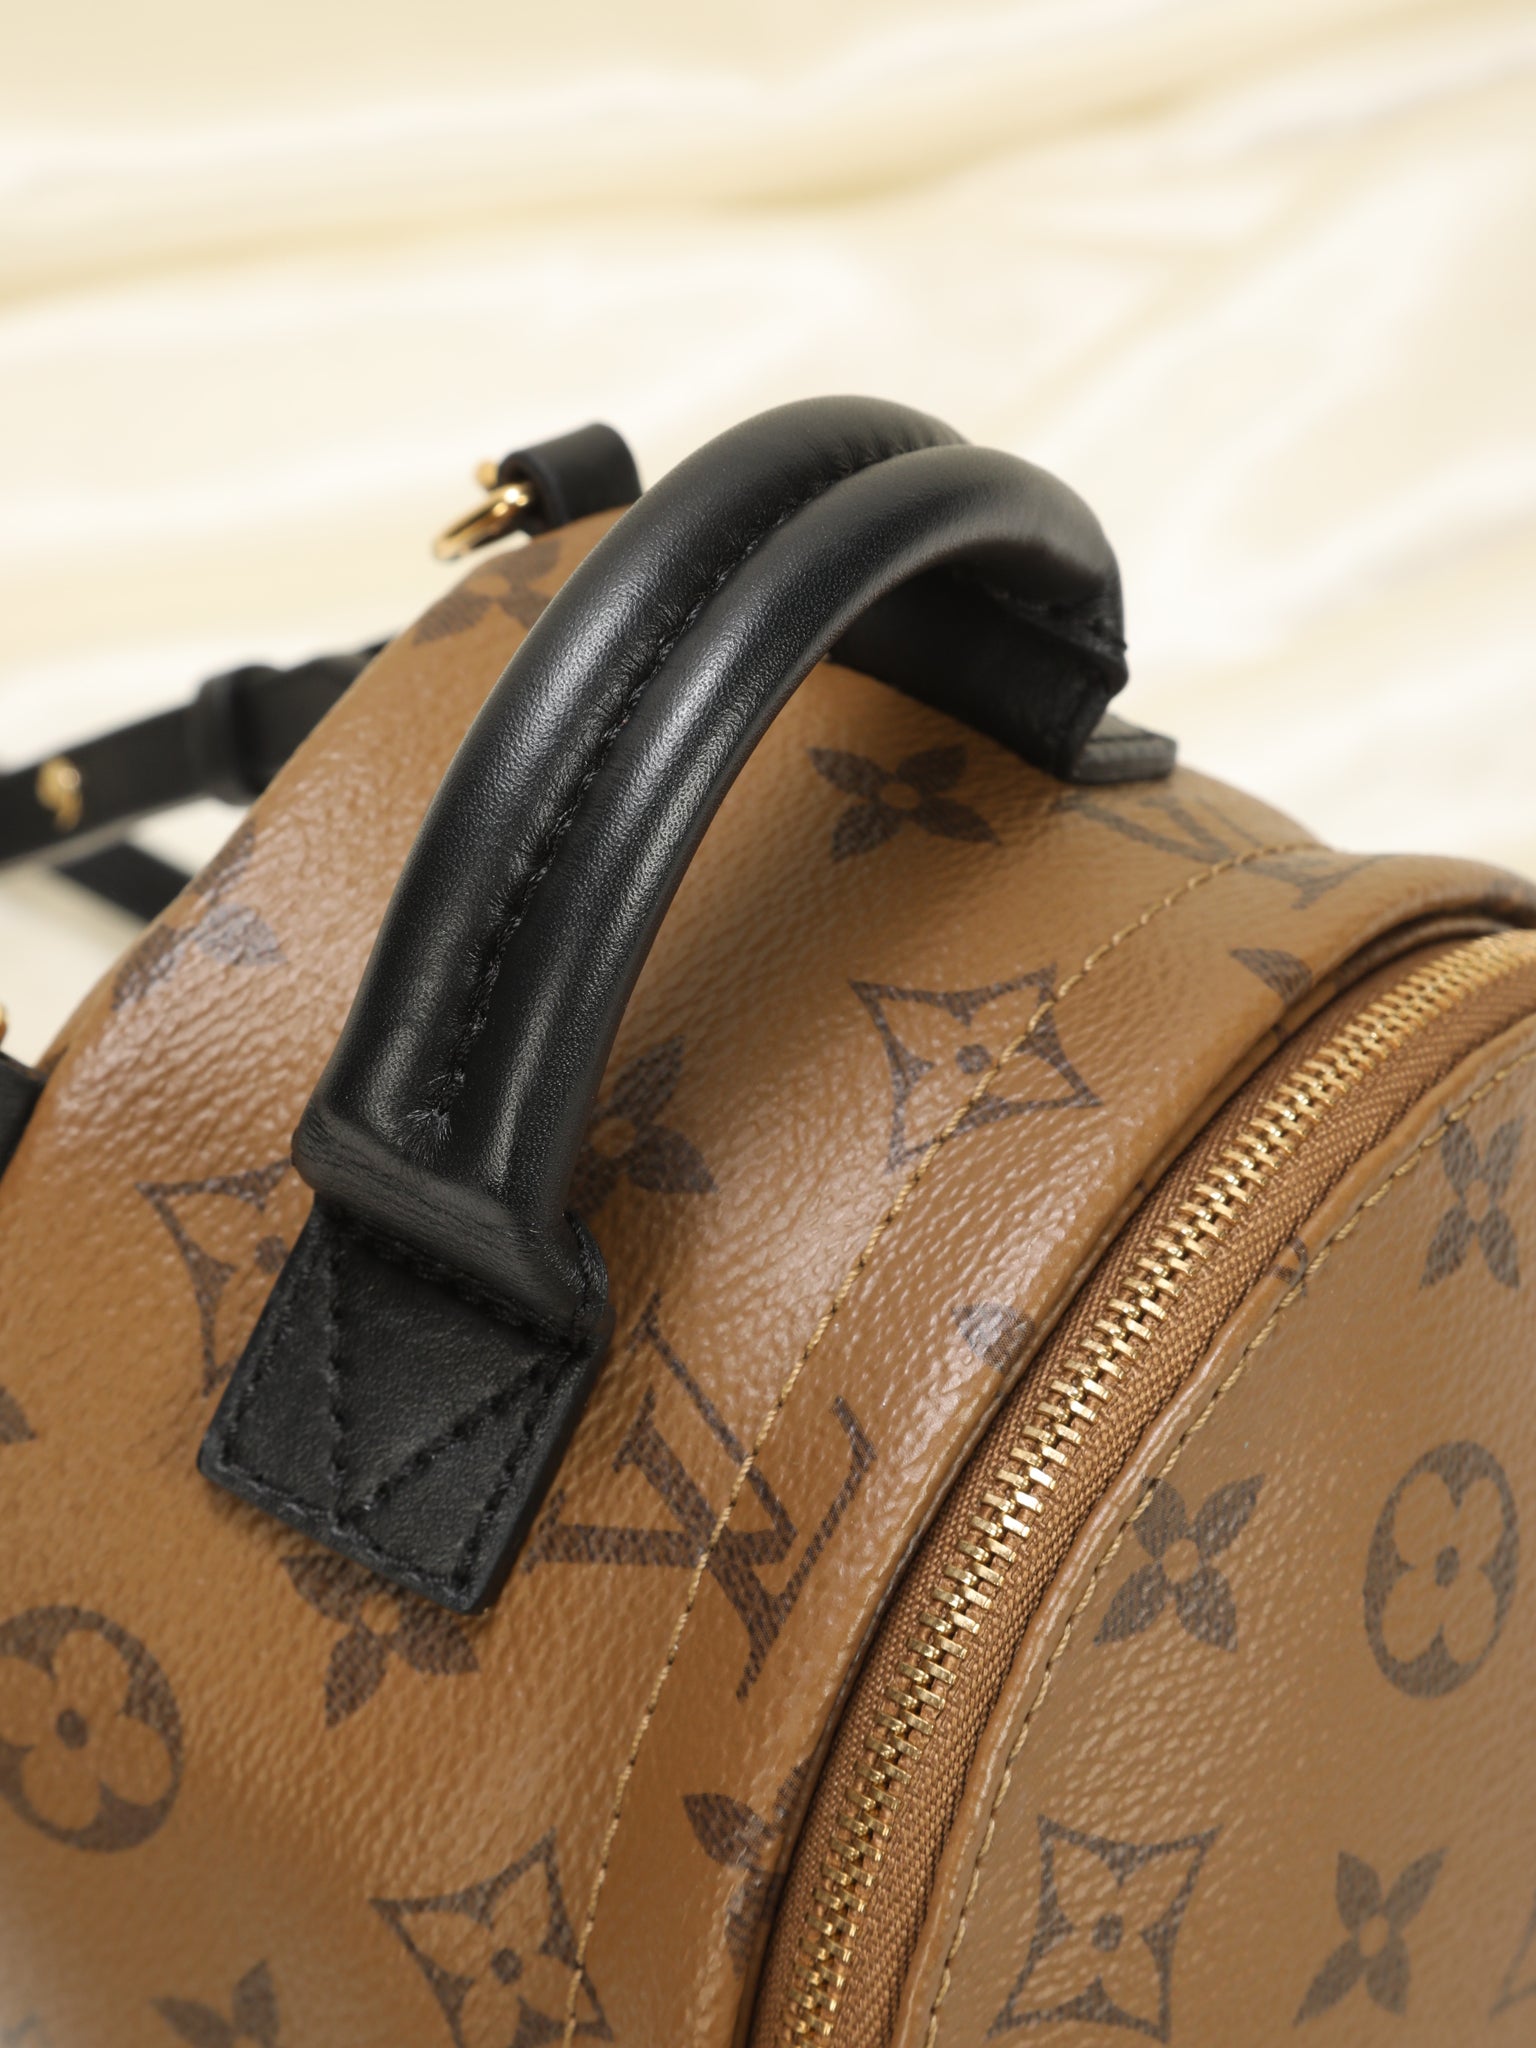 Louis Vuitton Palm Springs Reverse PM Backpack – SFN